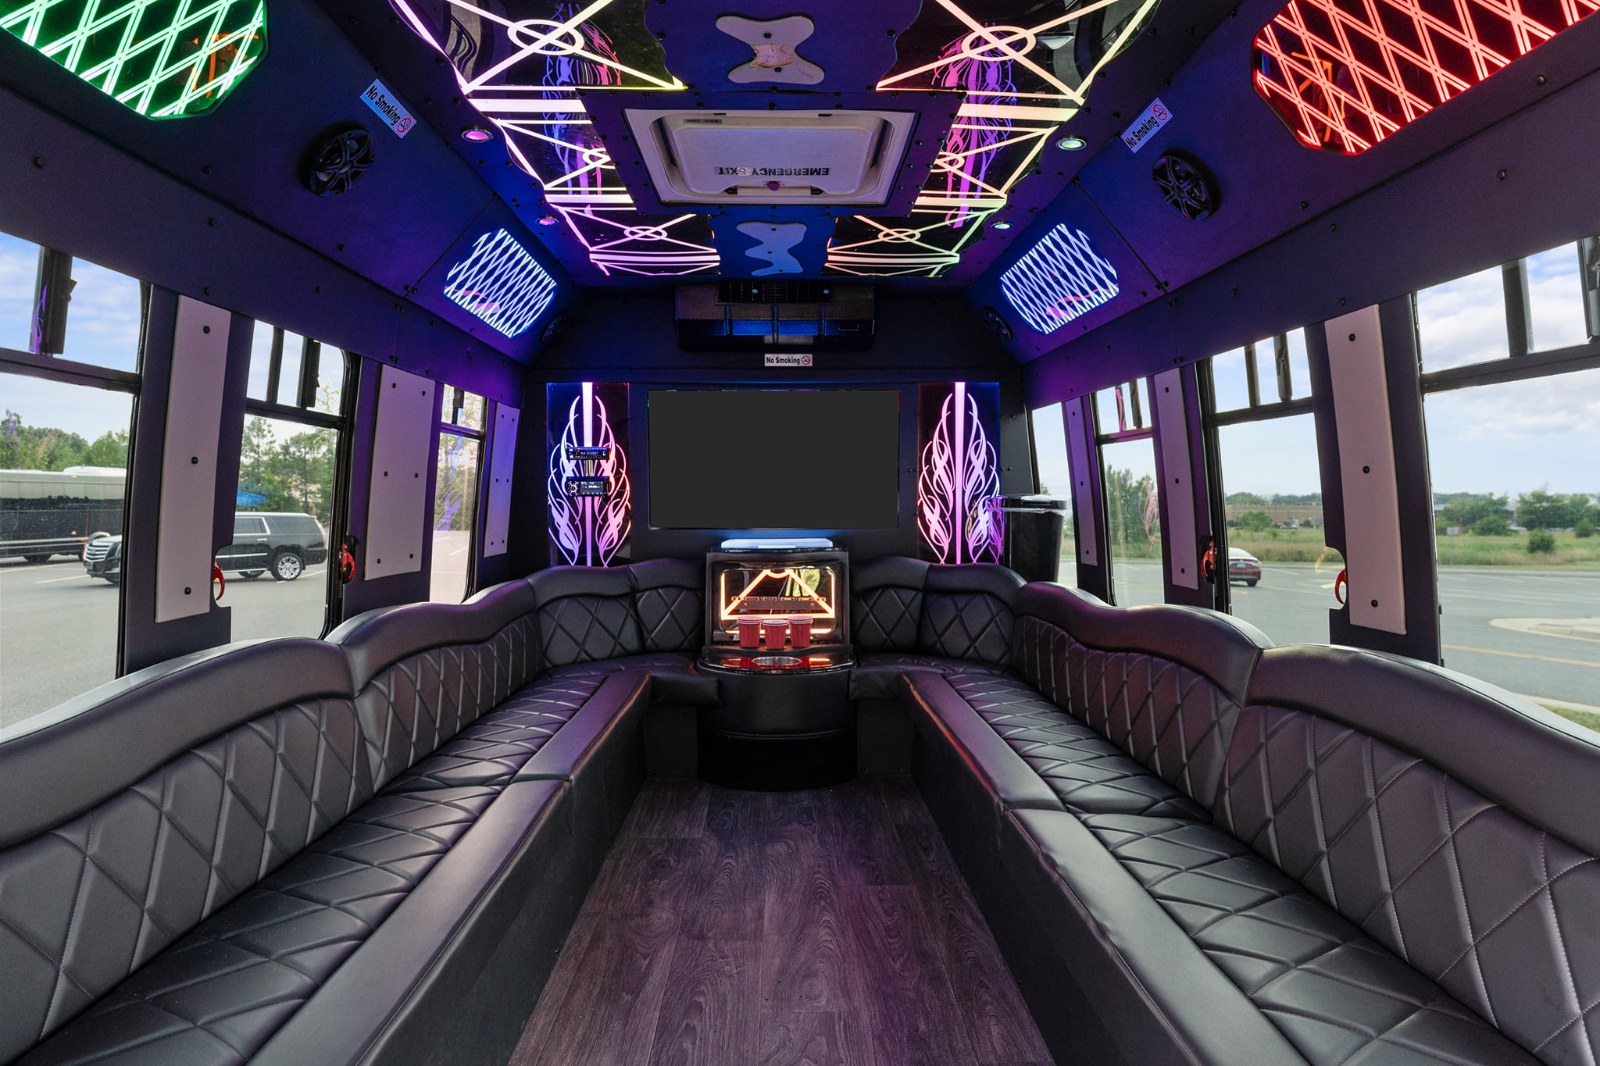 Limo Bus Rentals In San Clemente